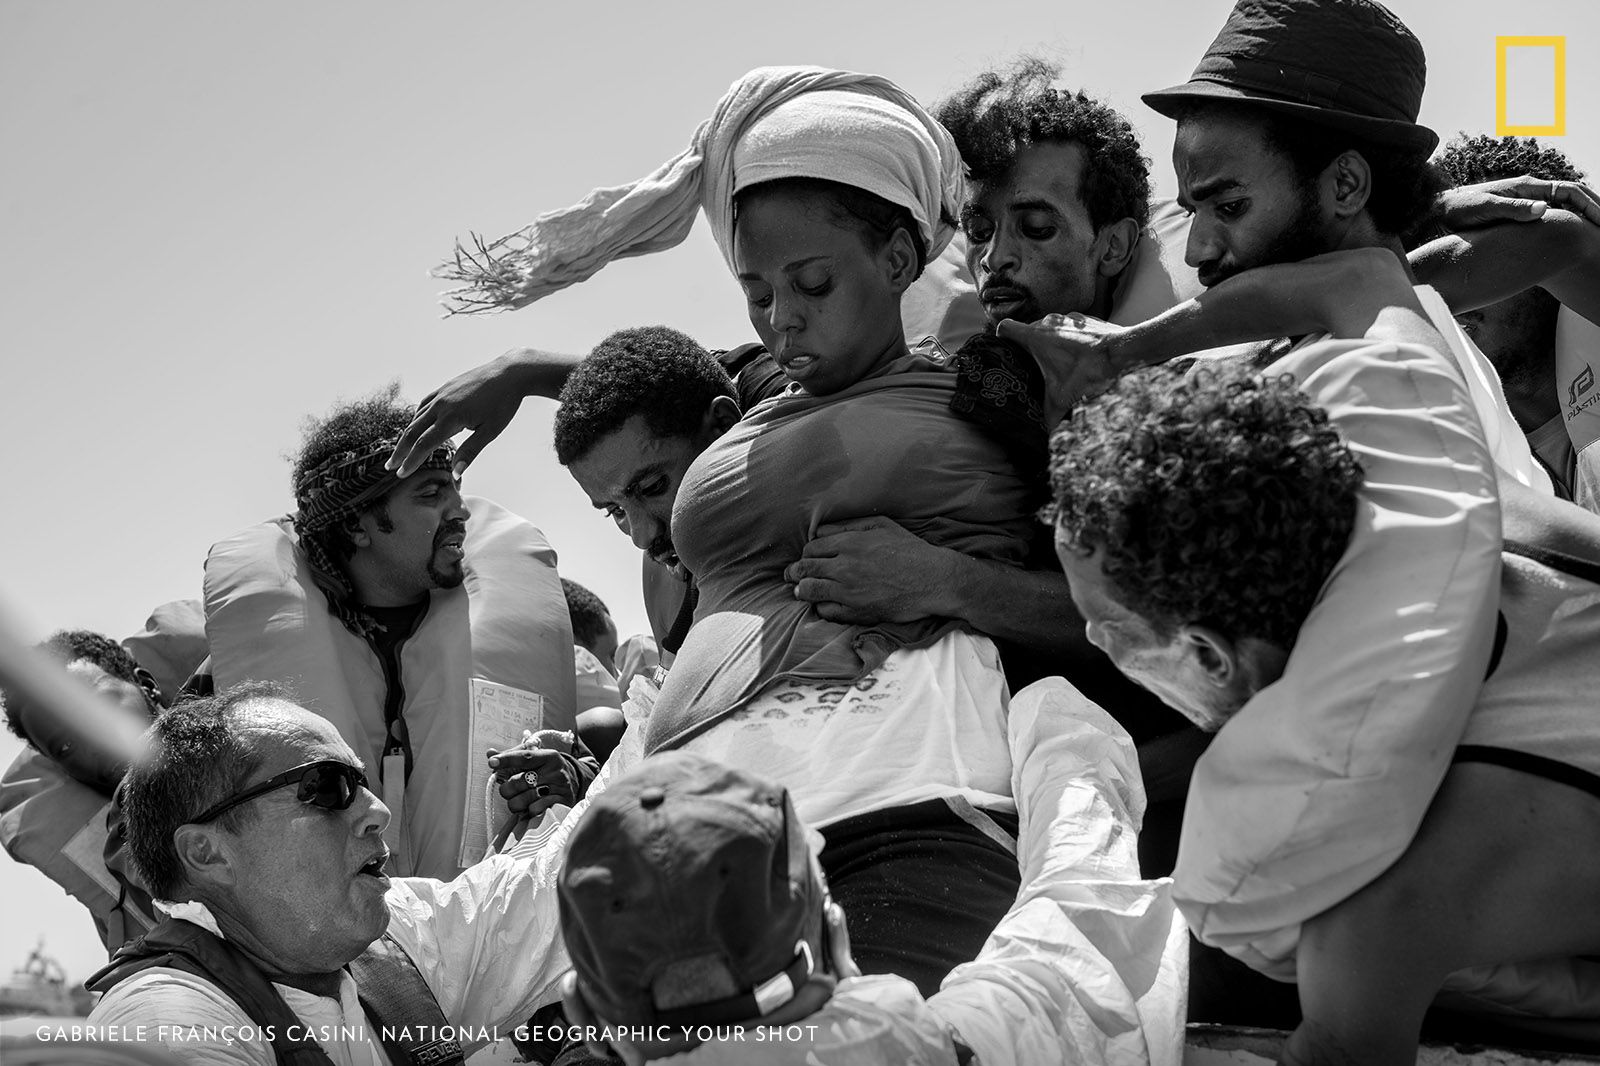 This photo was taken on a rescue boat in the Mediterranean Sea. A nine-month pregnant woman fainted because of heat and gasoline fumes from the engine of the dangerously overcrowded boat she was traveling on, in a desperate attempt to reach European shores. She took the incredibly hard decision to leave her home country, ruled by an oppressive regime, and embark on dangerous journey to guarantee a better future for her baby. She survived the crossing and gave birth few days later. Image by Gabriele Francois Casini.